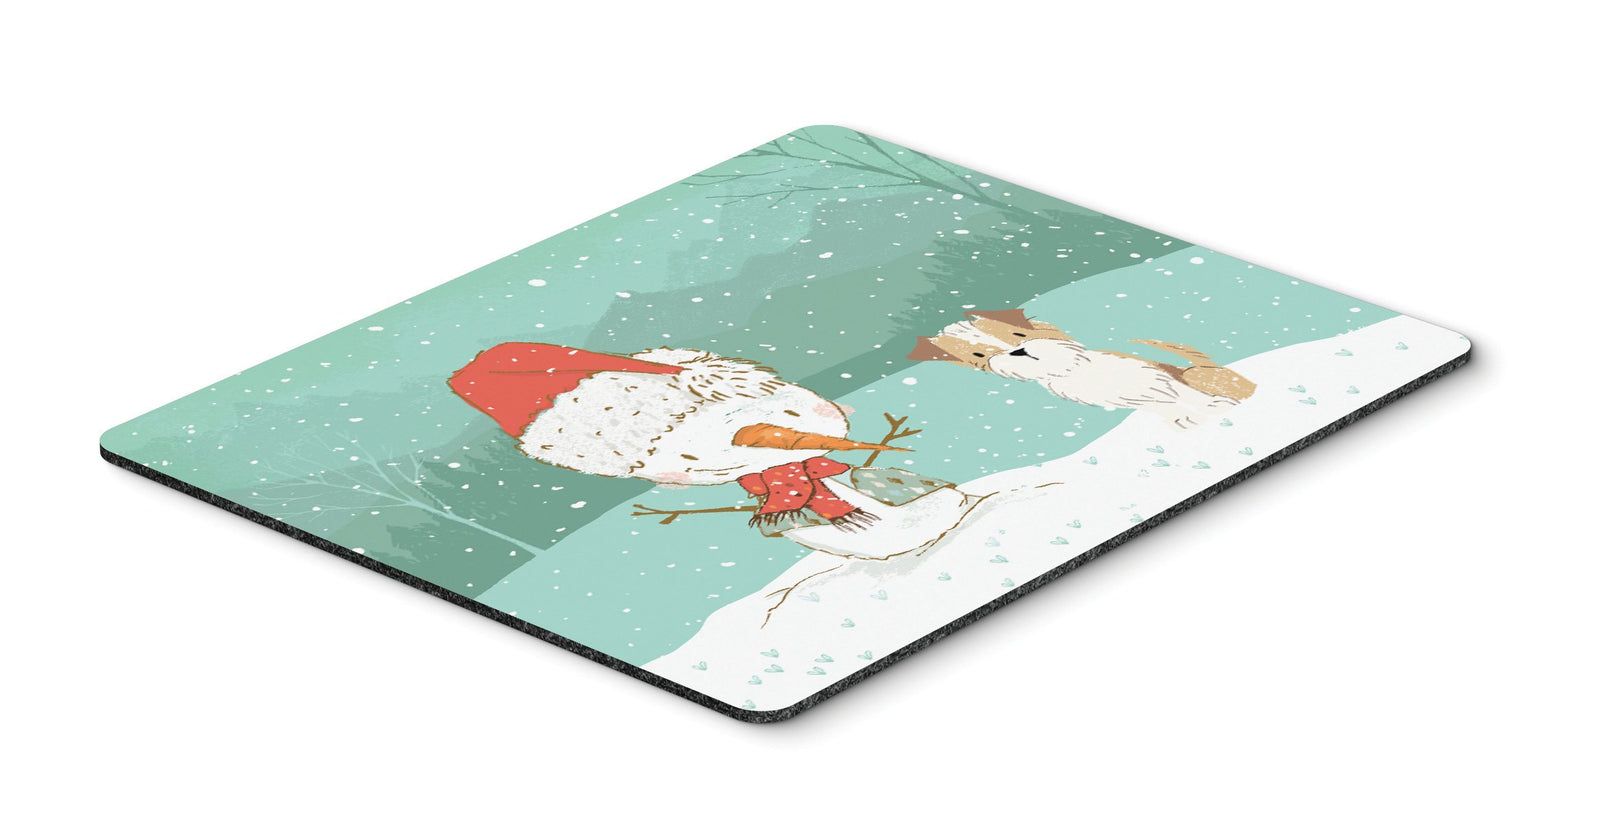 Brown and White Terrier Snowman Christmas Mouse Pad, Hot Pad or Trivet CK2096MP by Caroline's Treasures